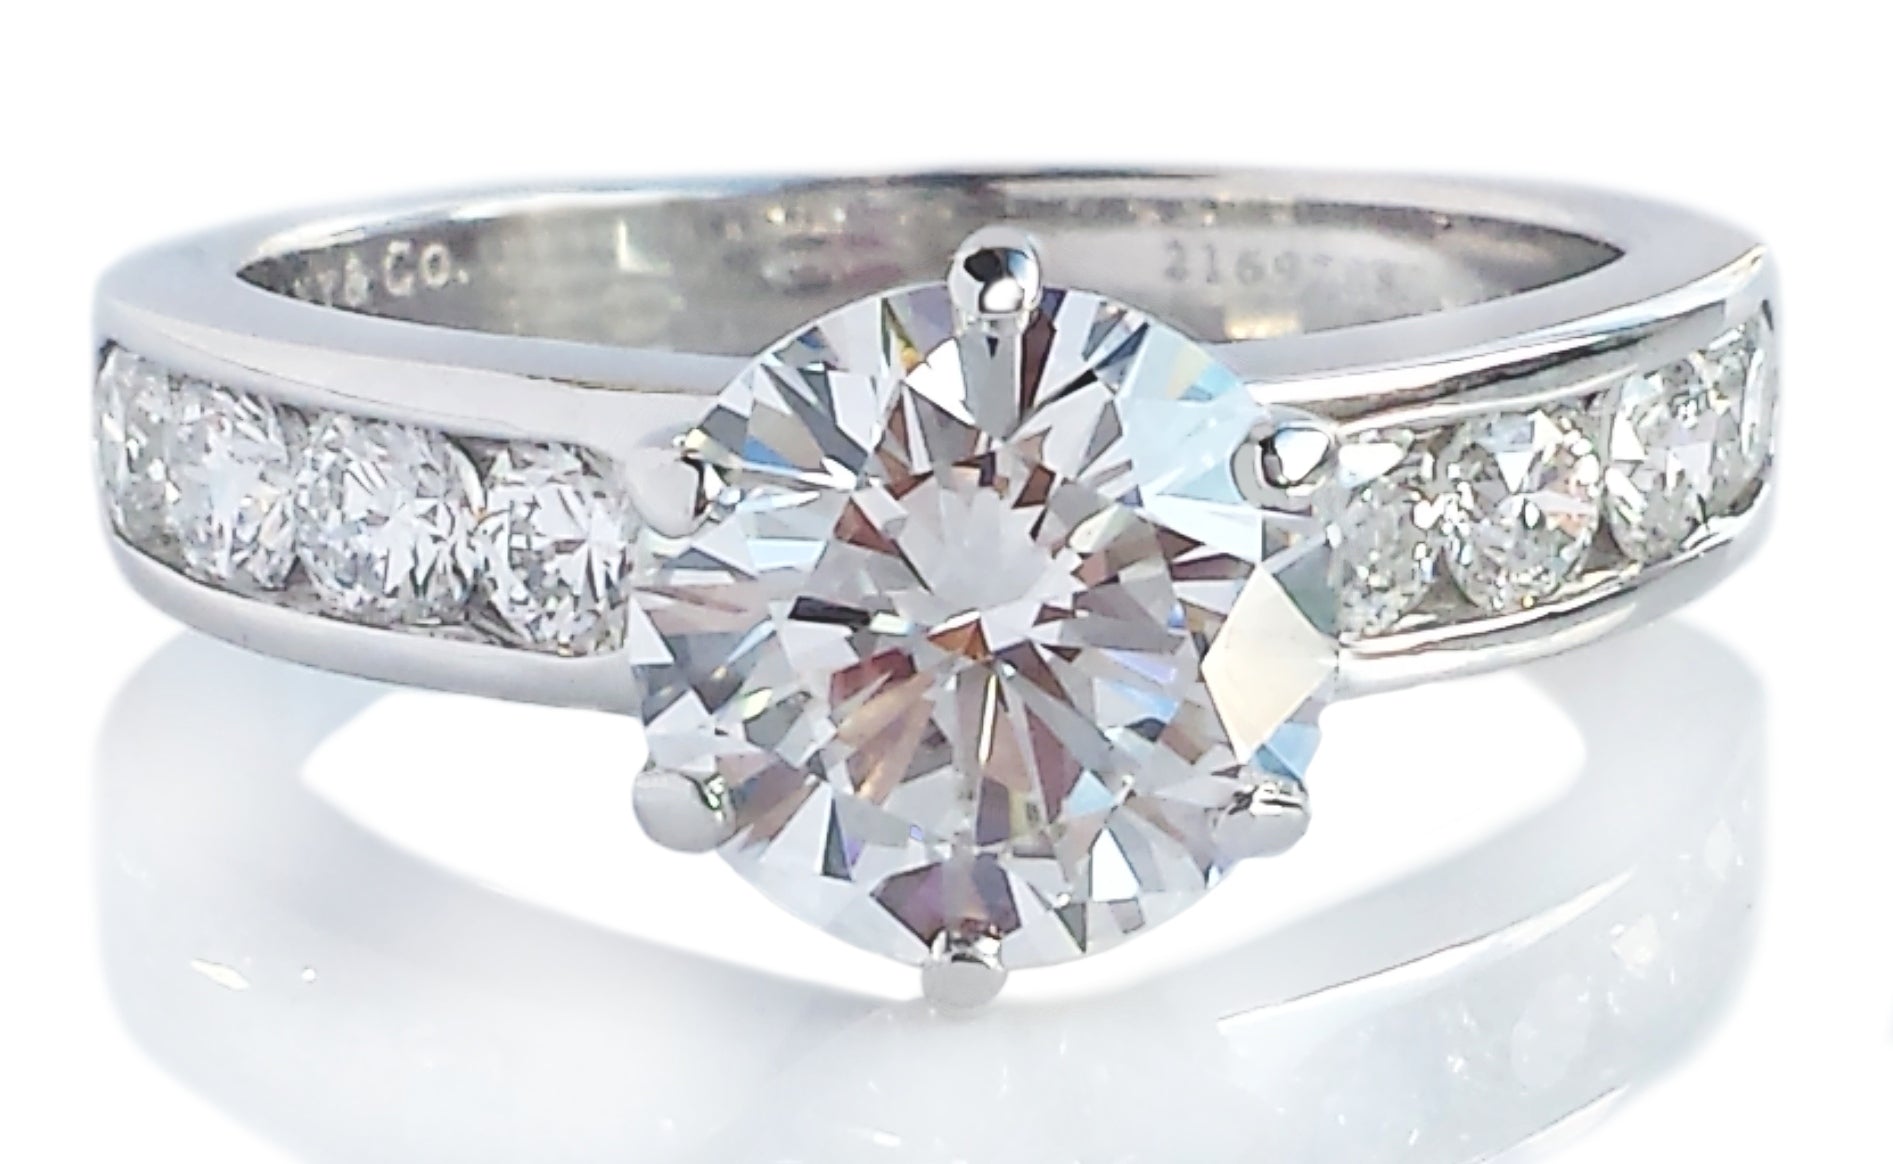 Tiffany & Co. 2.79tcw D/VVS2 Round Brilliant Diamond Engagement Ring with Side Stones